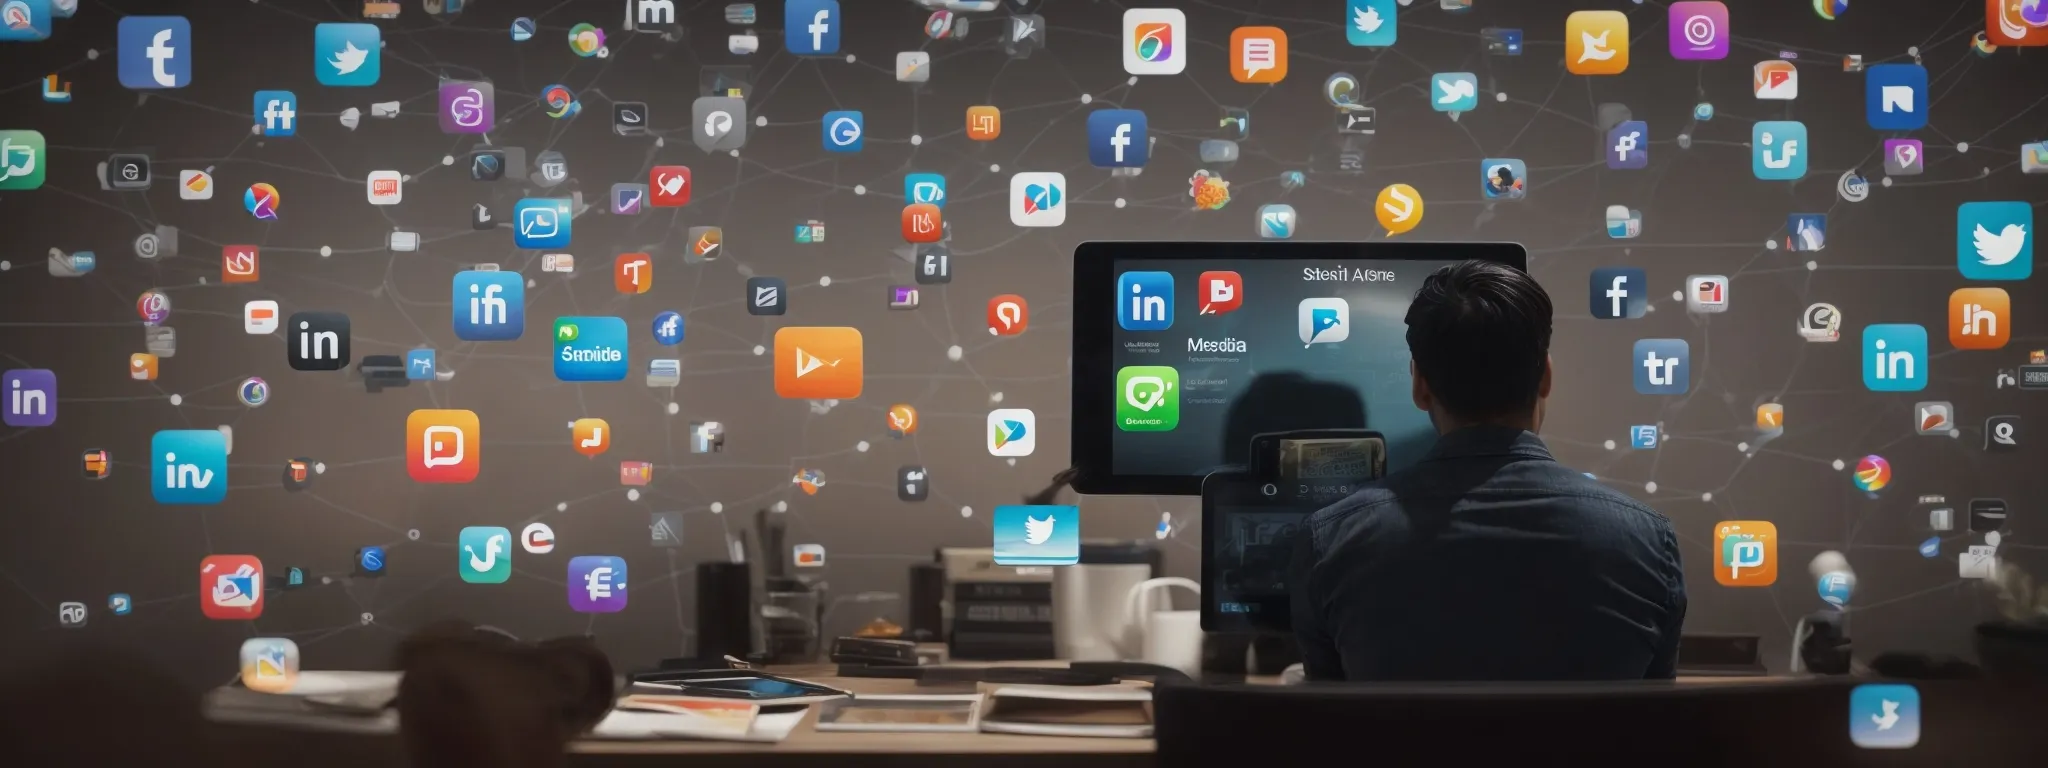 a person sitting at a desk with multiple social media app icons floating above their tablet displaying an infographic.